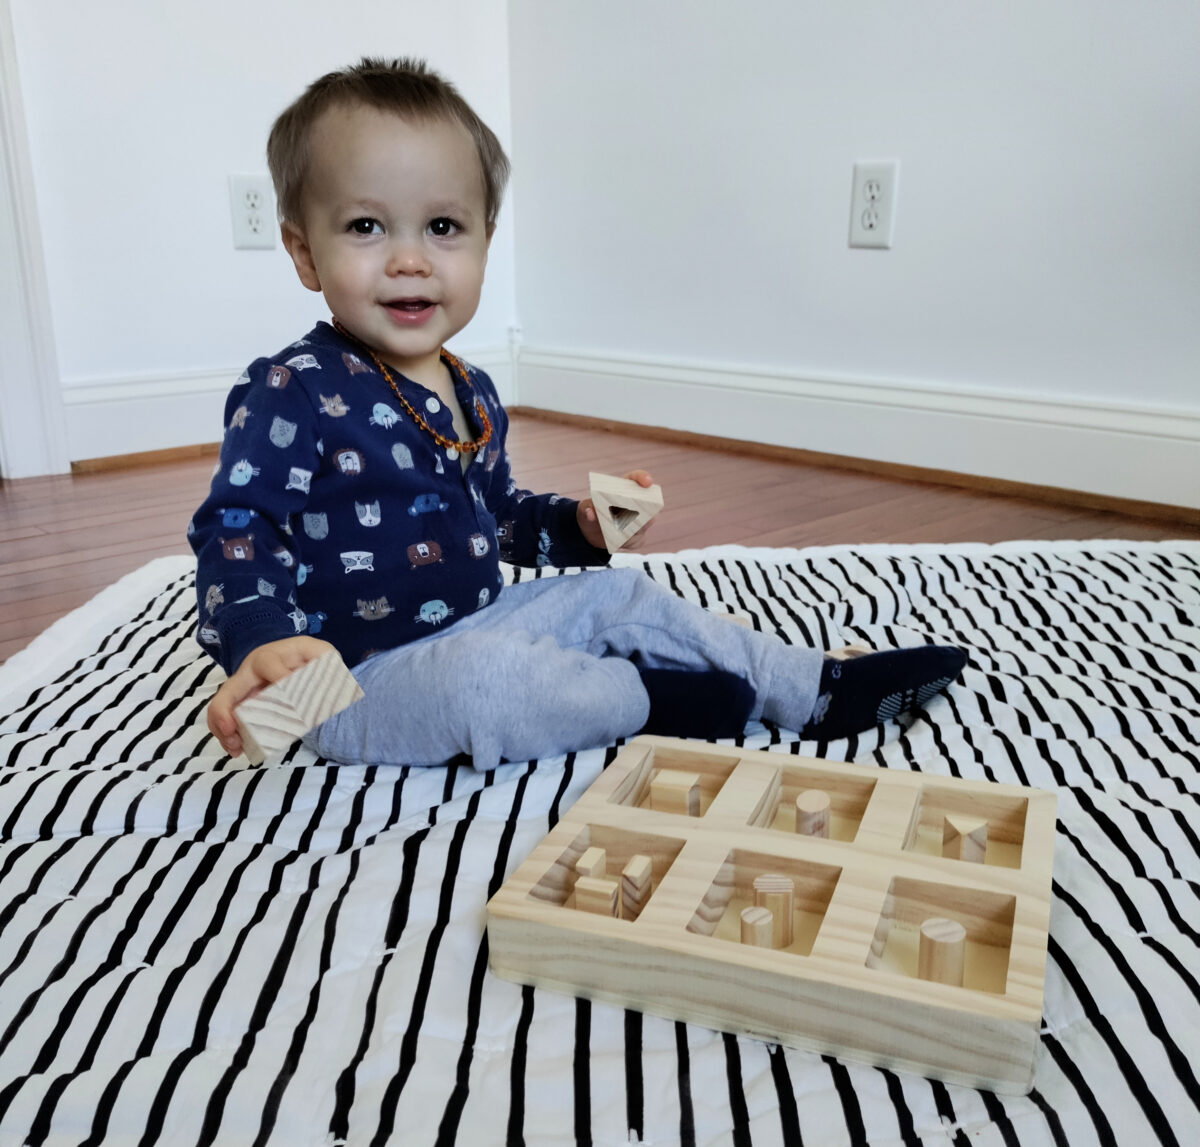 Dad's Brooklyn Deep Cutout Safe Puzzle Review - The Safer Wooden, Montessori Puzzle for Toddlers and Preschoolers